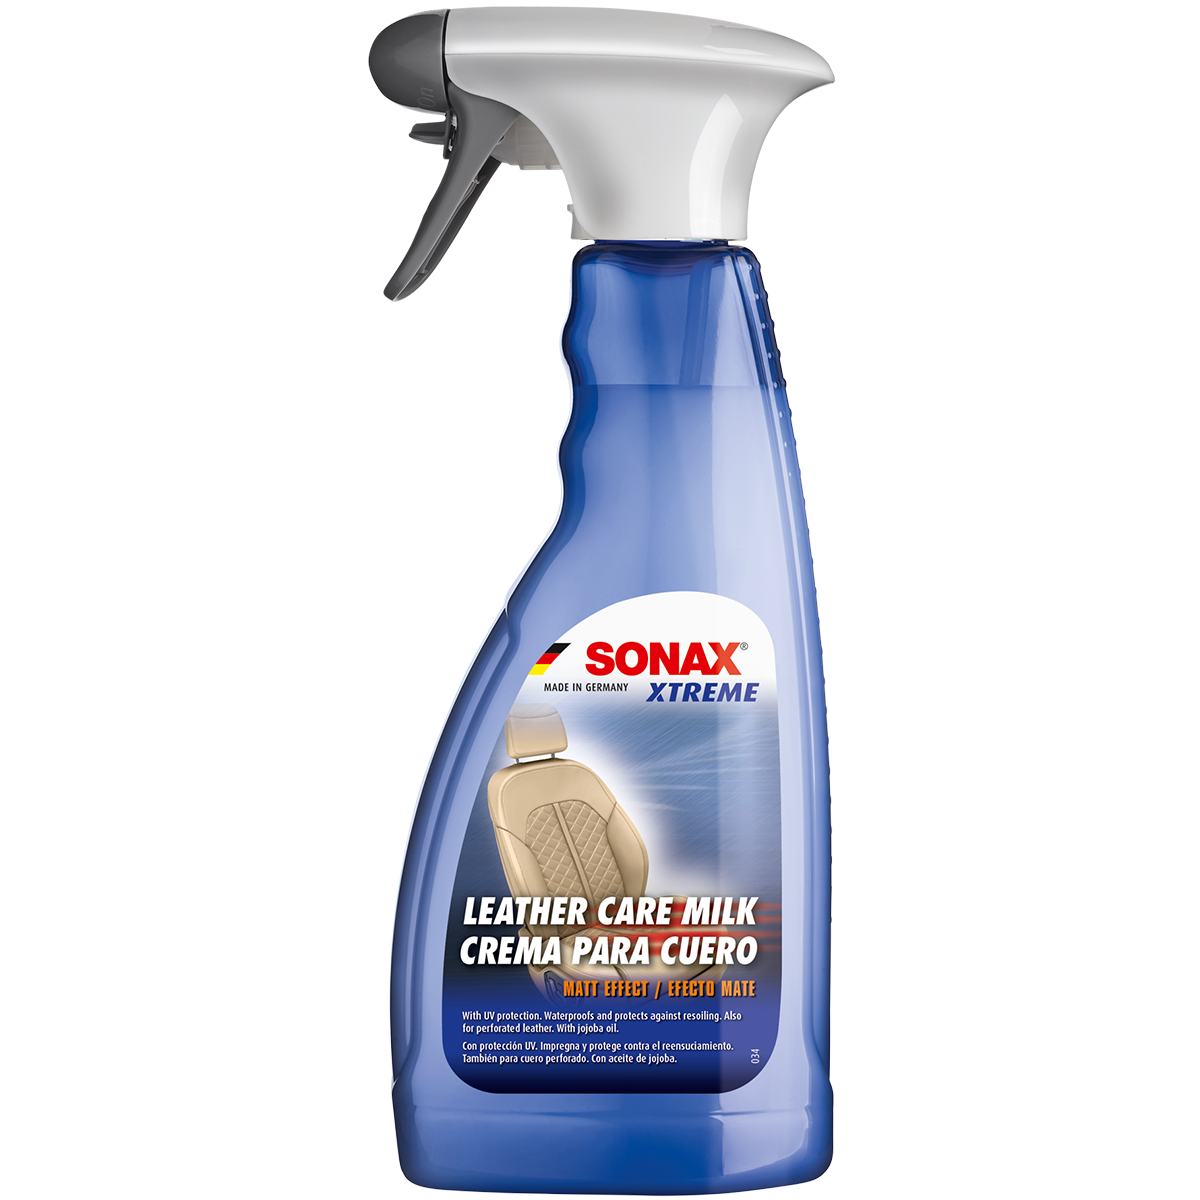 SONAX XTREME Leather Cleaner & Conditioner Milk 500ml *SALE*